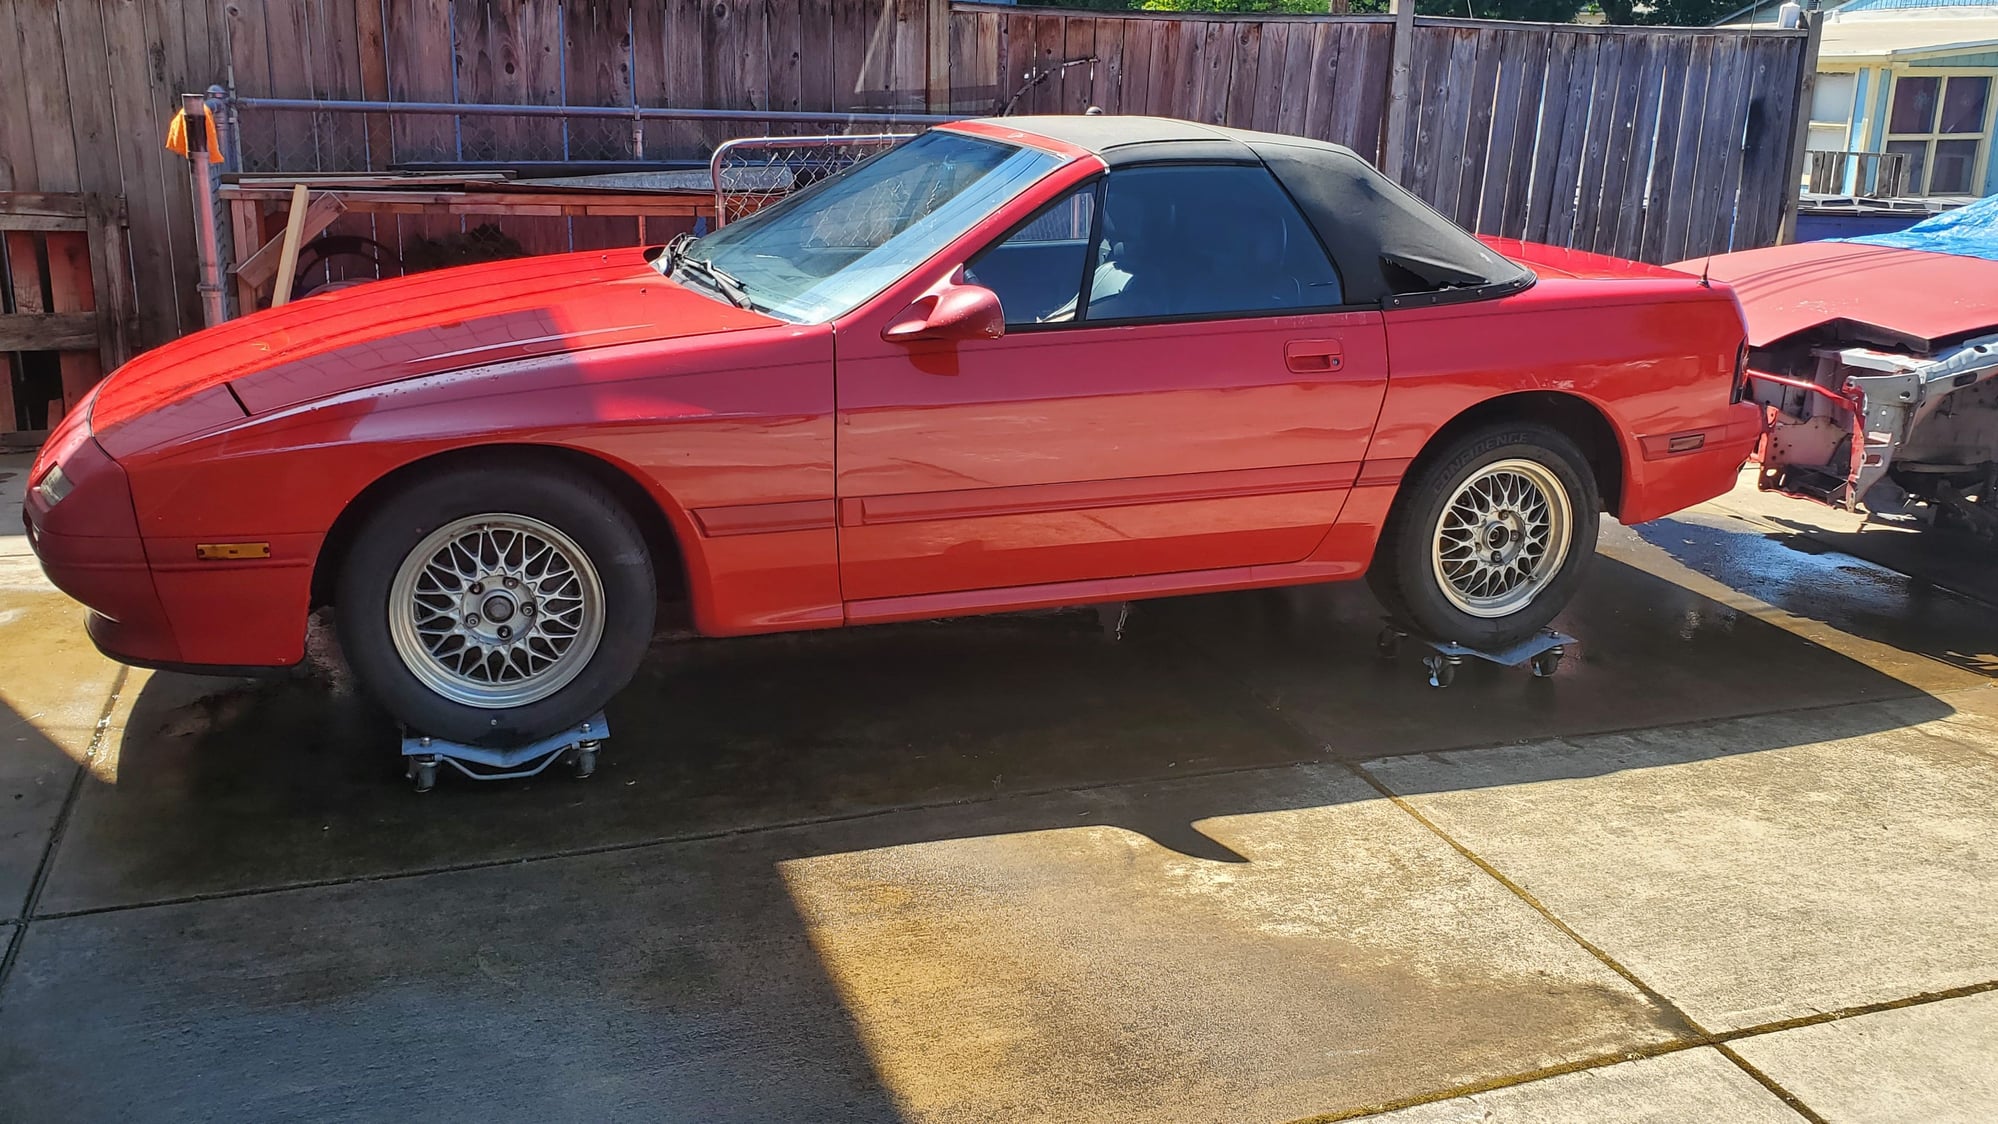 1991 Mazda RX-7 - 91 FC Vert Partout - Springfield, OR 97477, United States